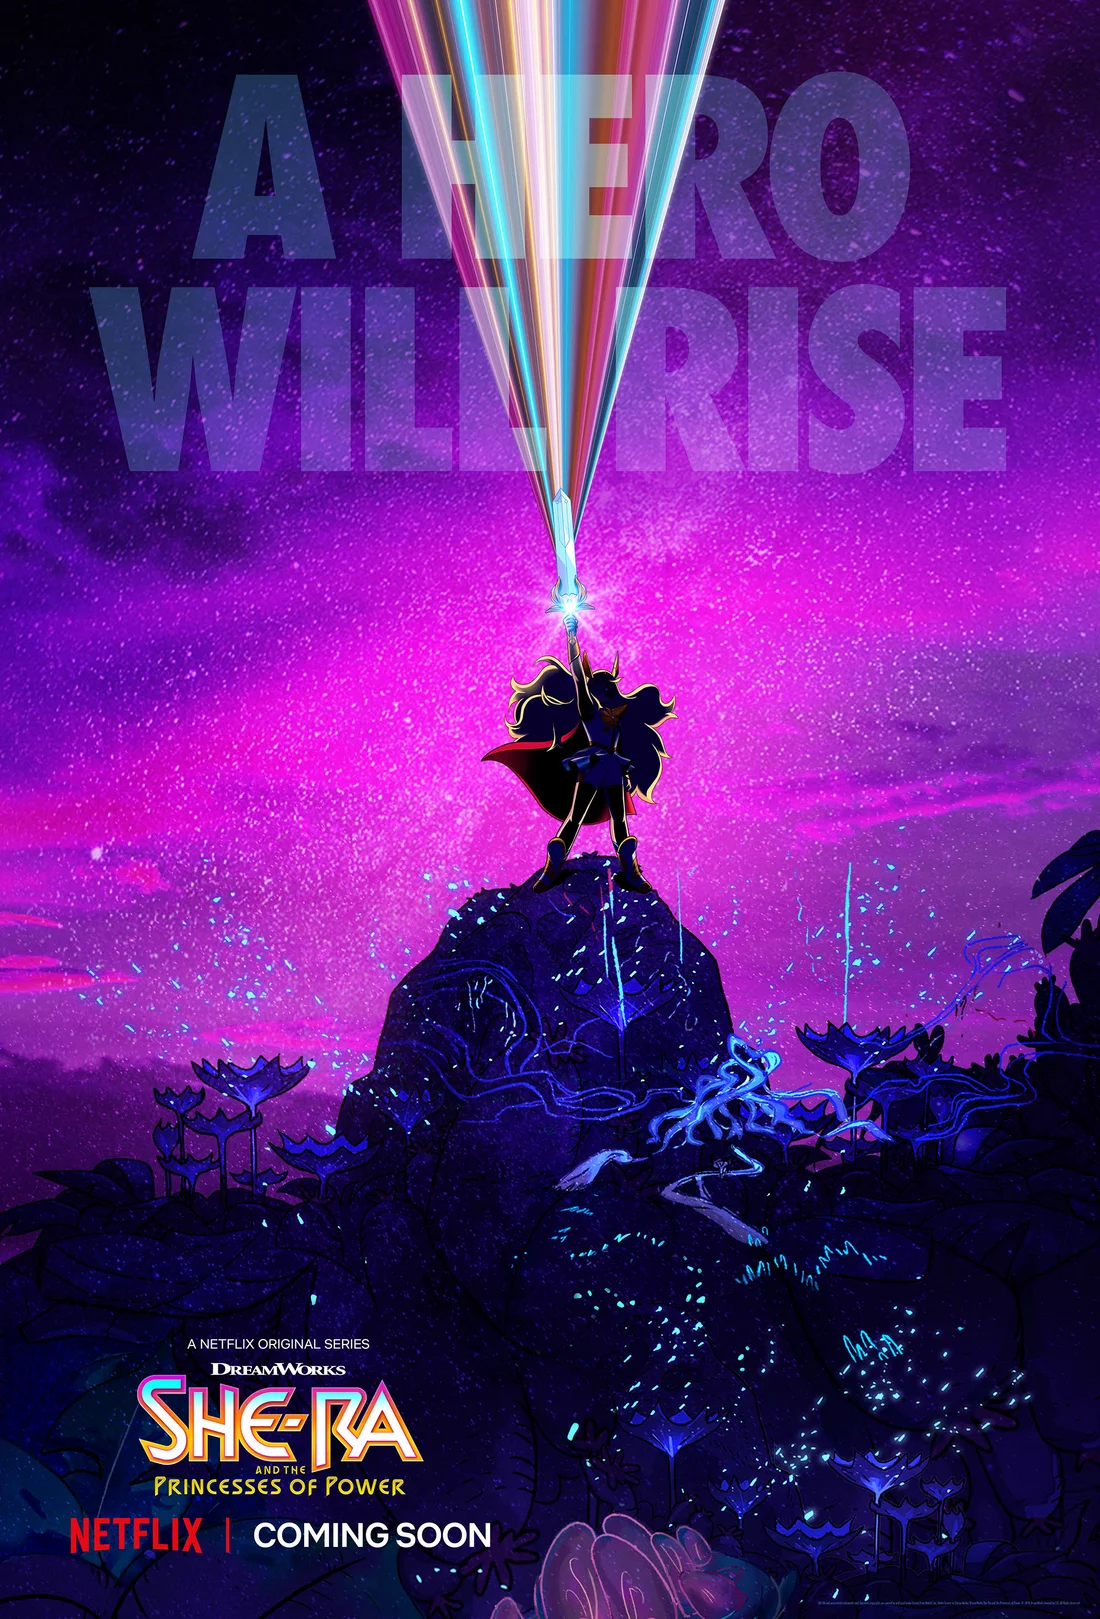 The She-Ra Reboot Debuts The First Shadowy Look At The New Princess Of Power